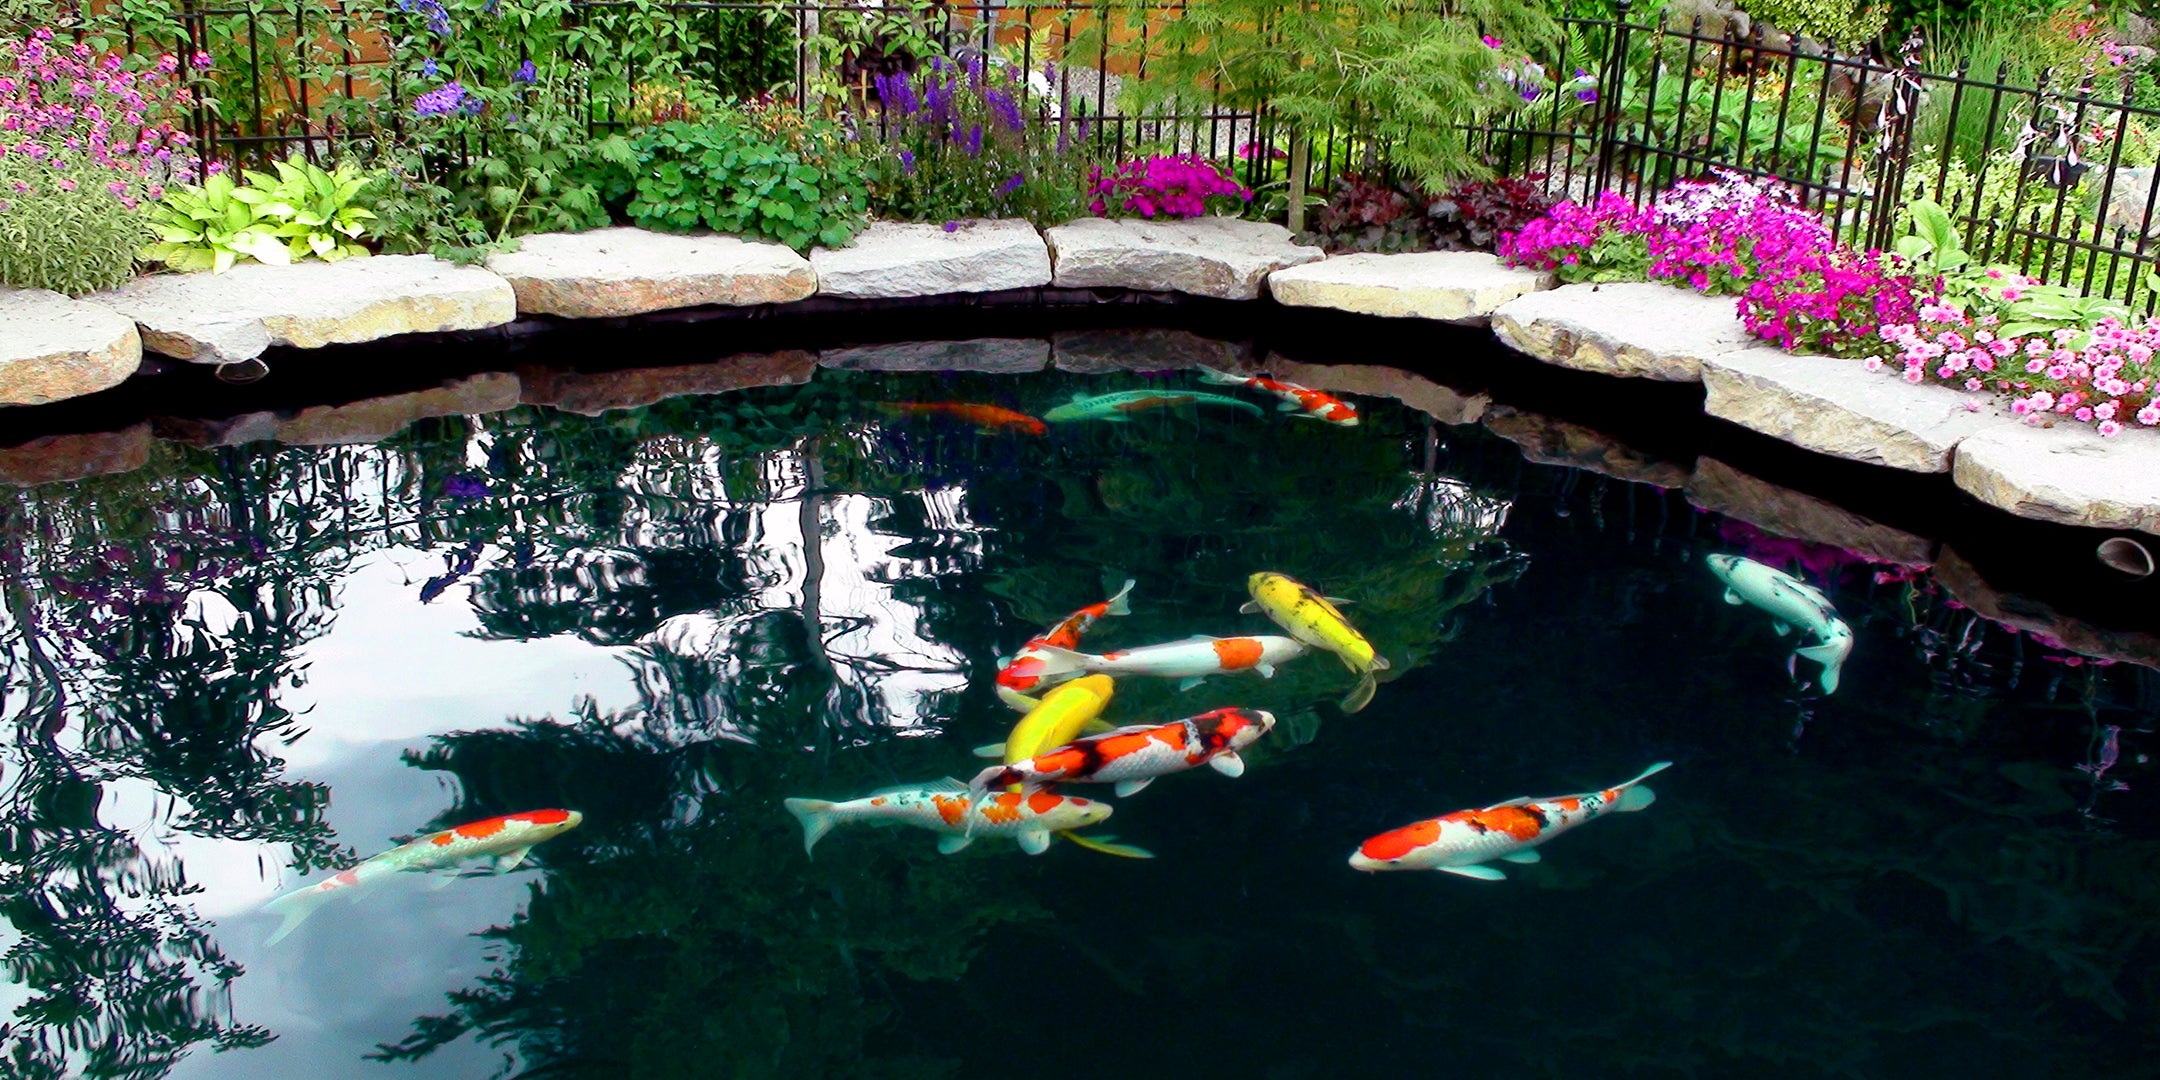 Beautiful bubble-less koi pond with lots of koi fish and flowers around the koi pond